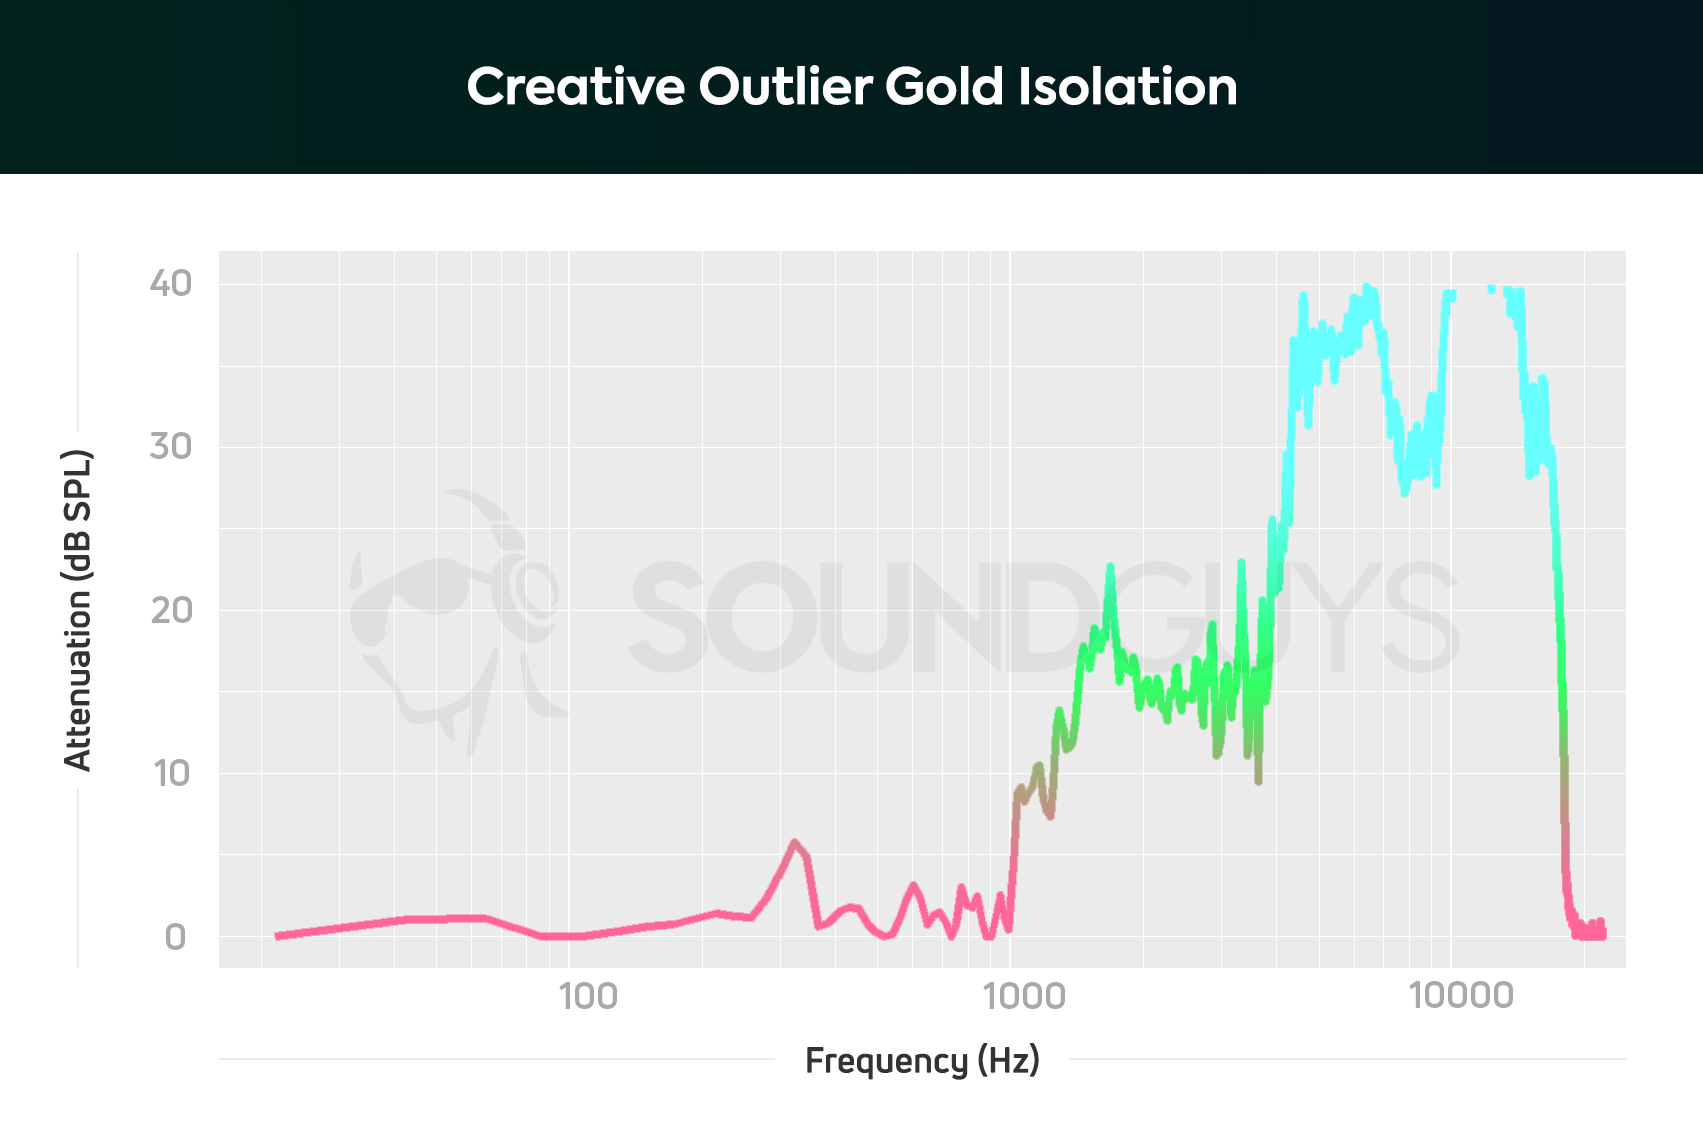 An isolation chart for the Creative Outlier Gold true wireless earbuds under $100.